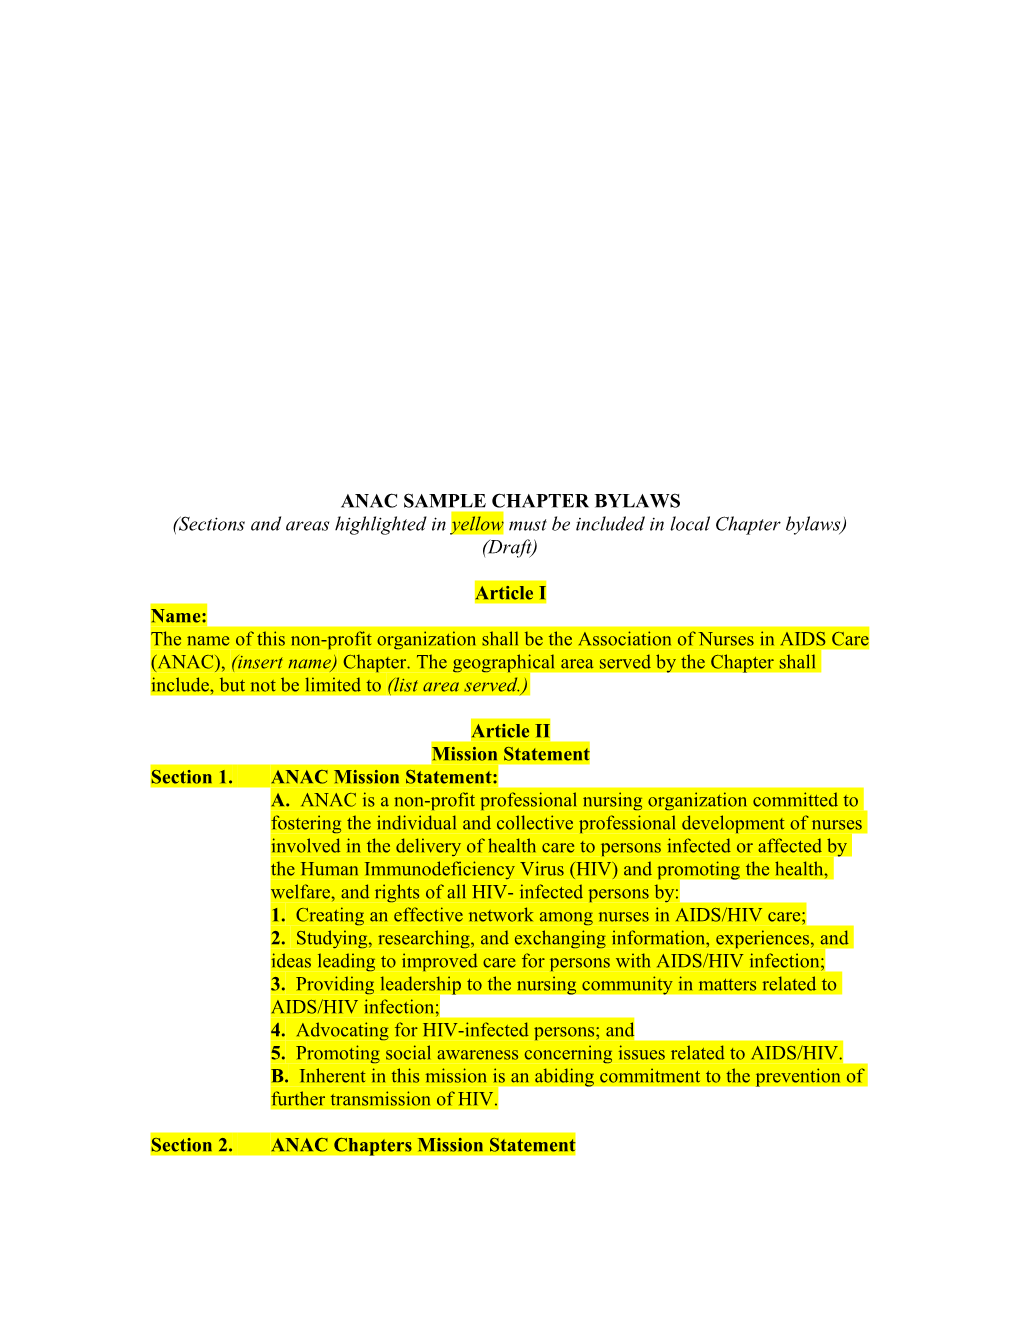 Language in This Sample That Is Highlighted in Yellow Is Mandatory Content for Chapter Bylaws